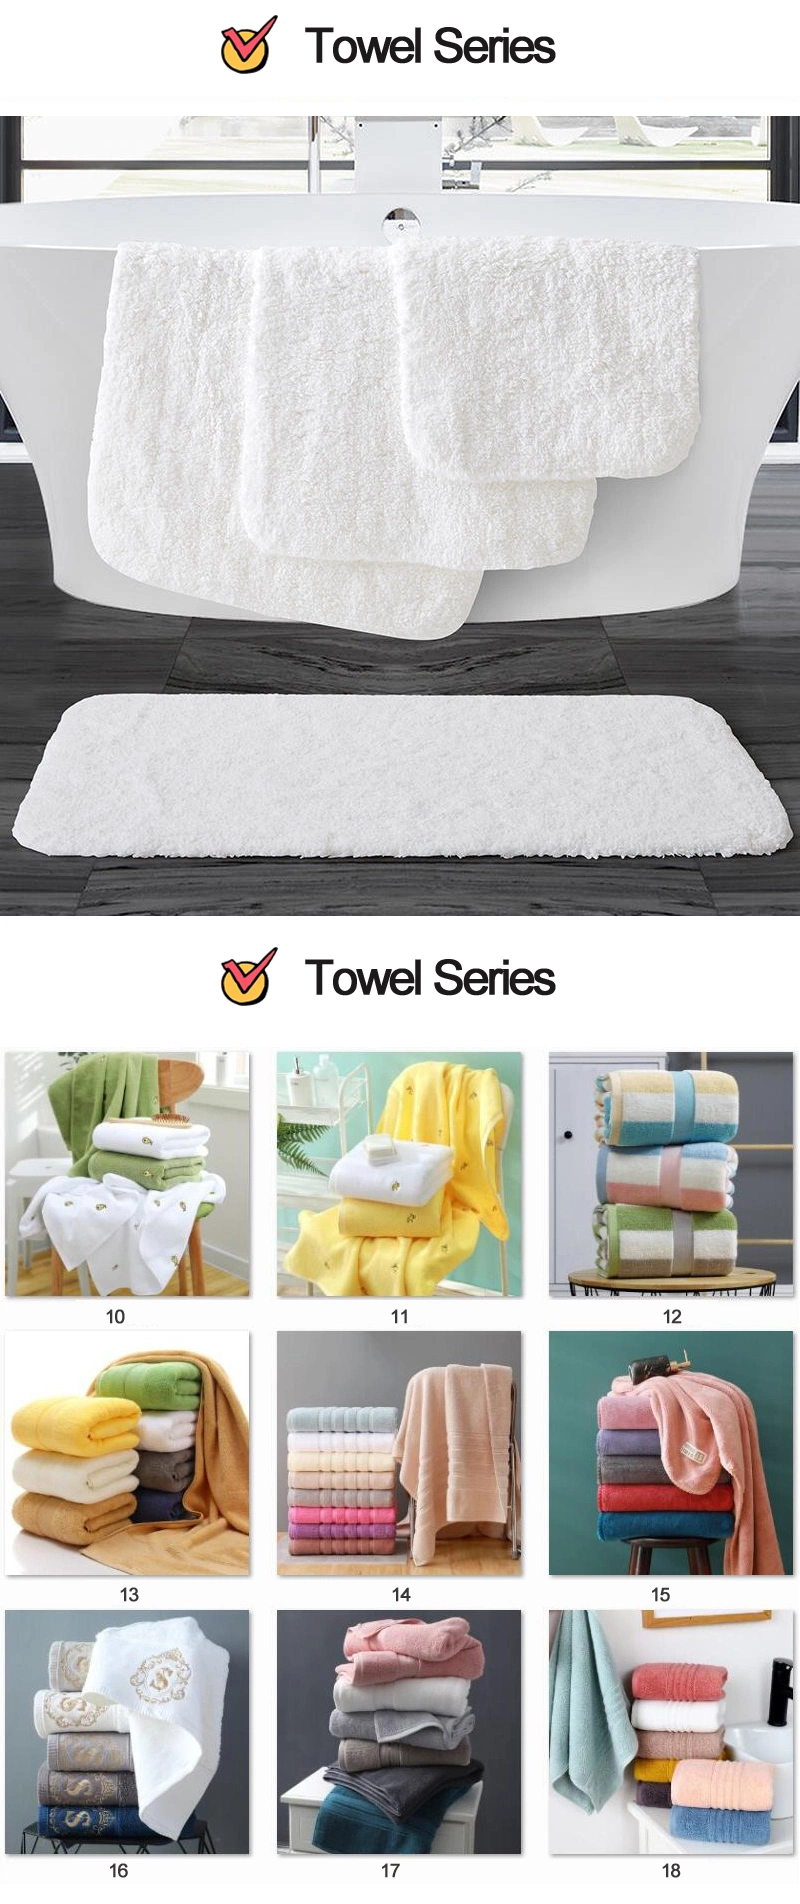 Face Sizes Hot Sale Cheaper China Terry Super Soft Bath Sheet Restaurants 80*160cm 100% Cotton Beach Towel for Hotel and Resort